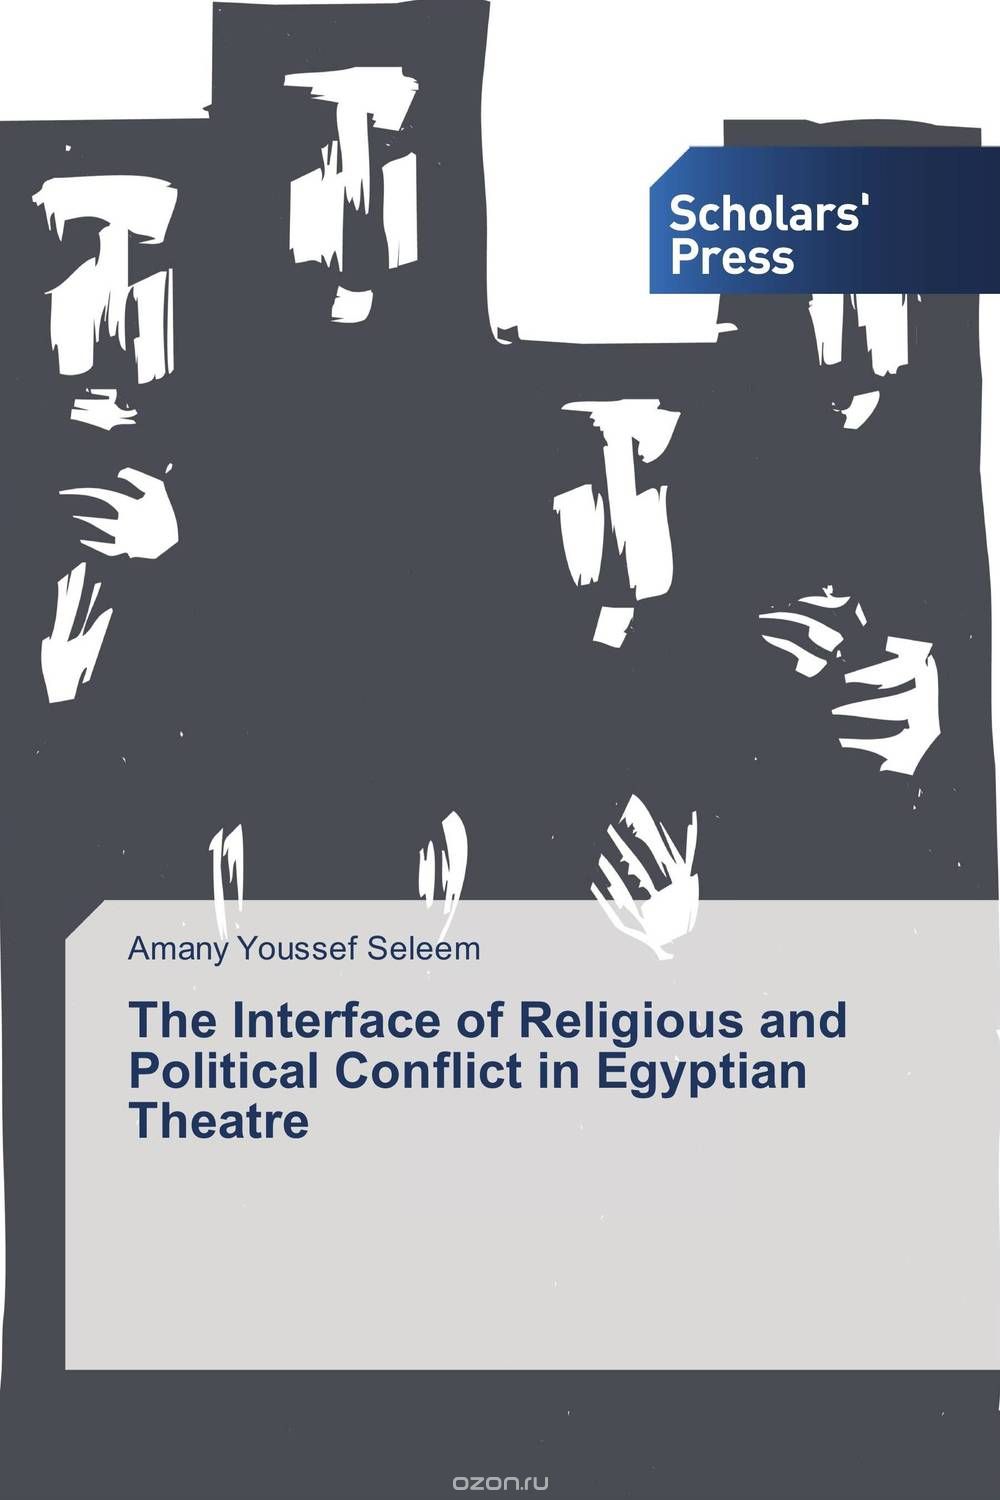 Скачать книгу "The Interface of Religious and Political Conflict in Egyptian Theatre"